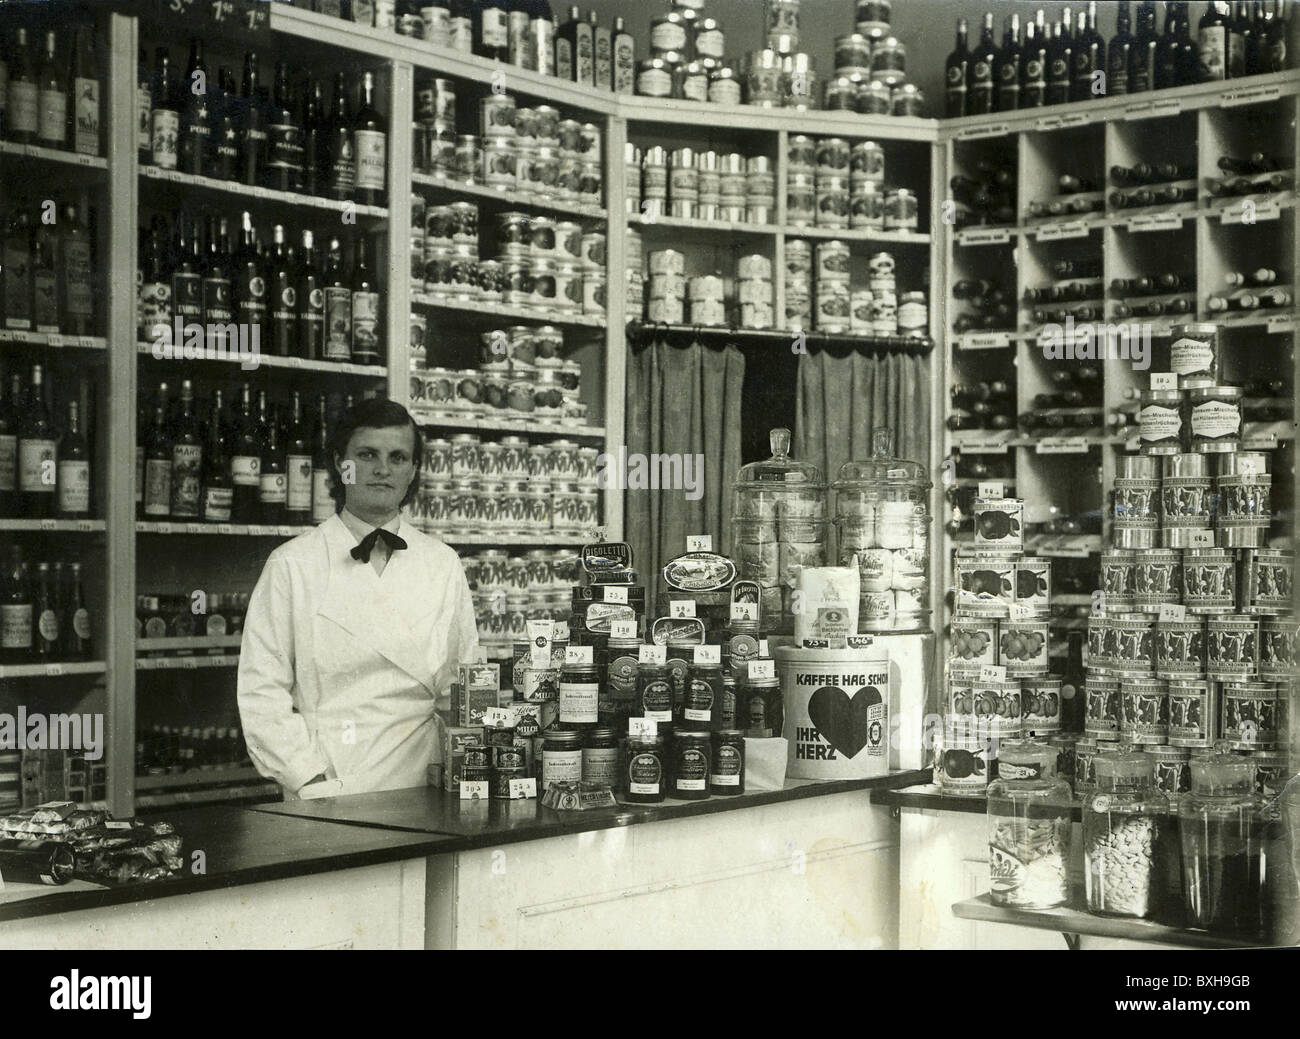 trade, shops, saleswoman in Tante-Emma shop, Germany, 1935, Additional-Rights-Clearences-Not Available Stock Photo